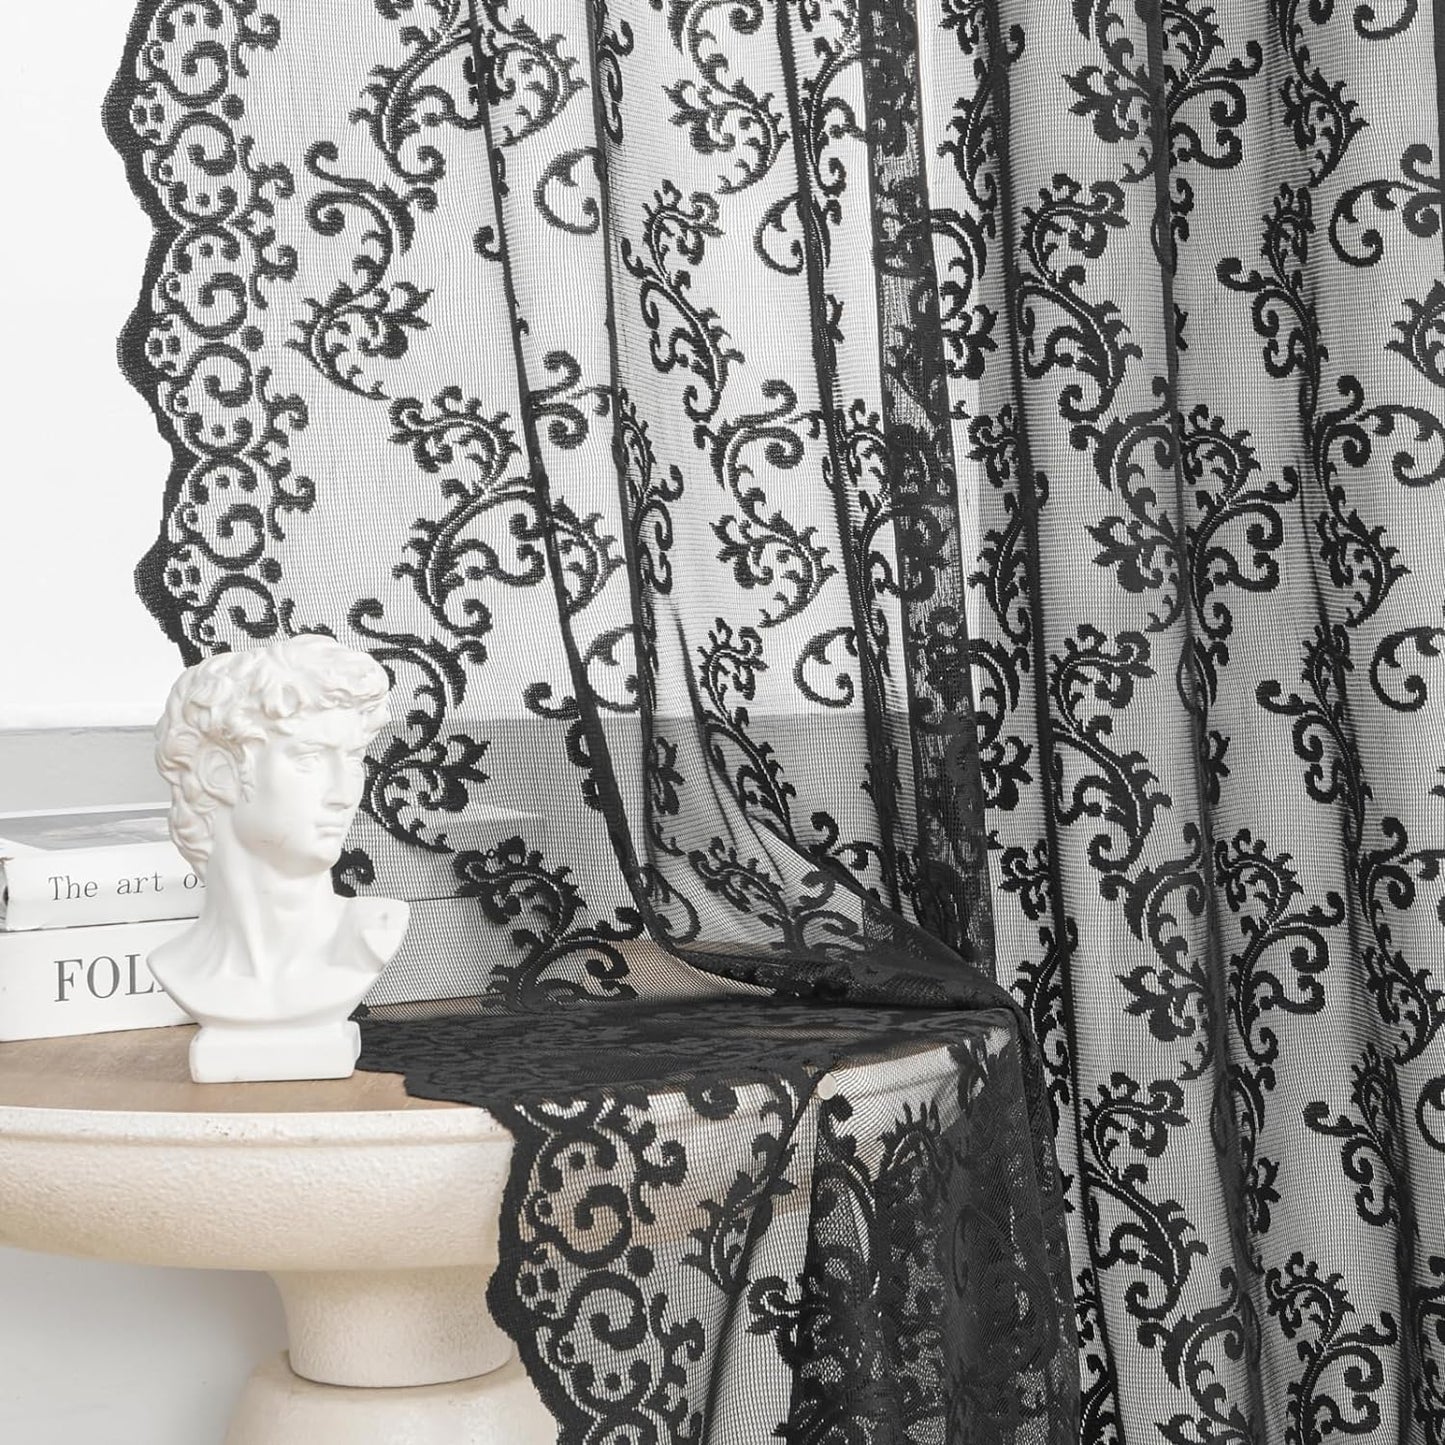 Blush Pink Lace Curtains 84 Inches Long 2 Panels Vintage French Floral Sheer Curtains for Living Room Bedroom Victorian Paisley Drapes Rod Pocket Light Filtering Crochet Window Decor, 52X84  FOLKSIDE Black W52''Xl63'' 